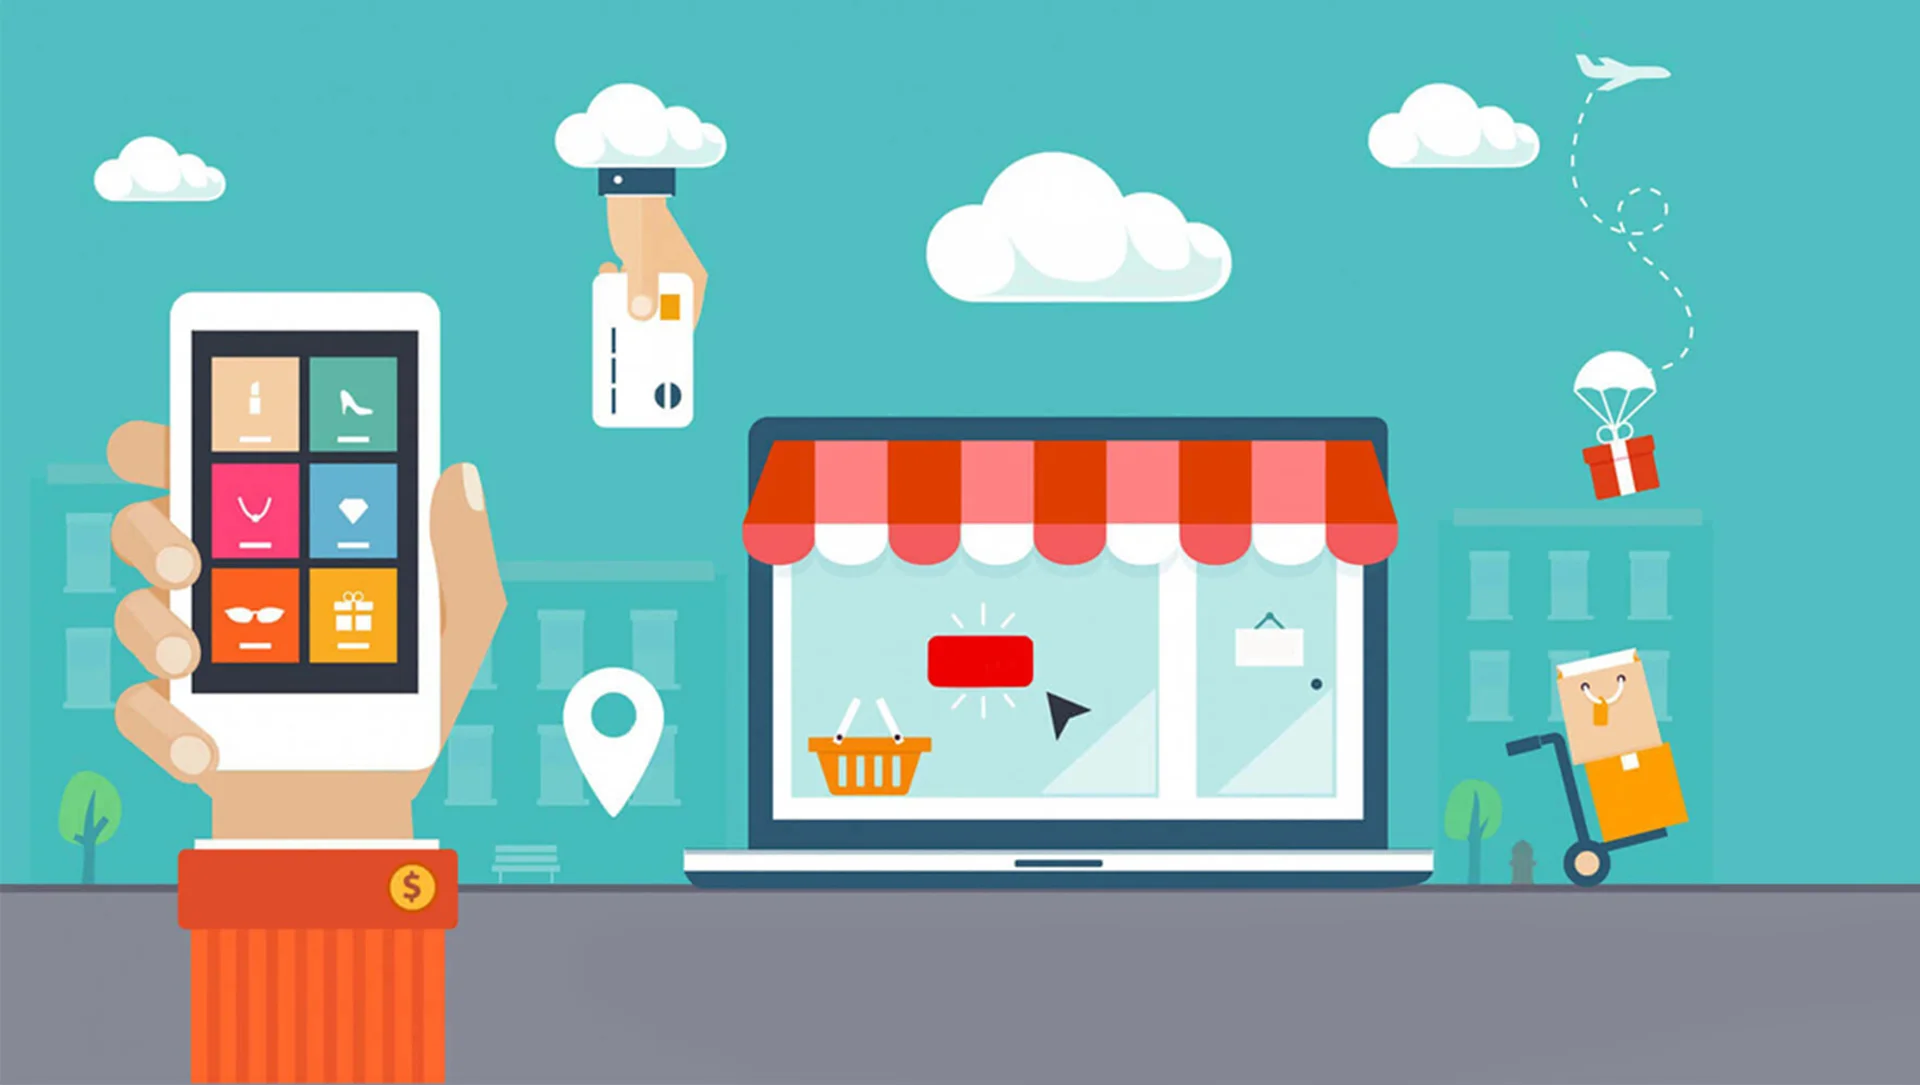 e-commerce-mobile-app-development-2022-know-the-features-trends-cost-related-blog-12